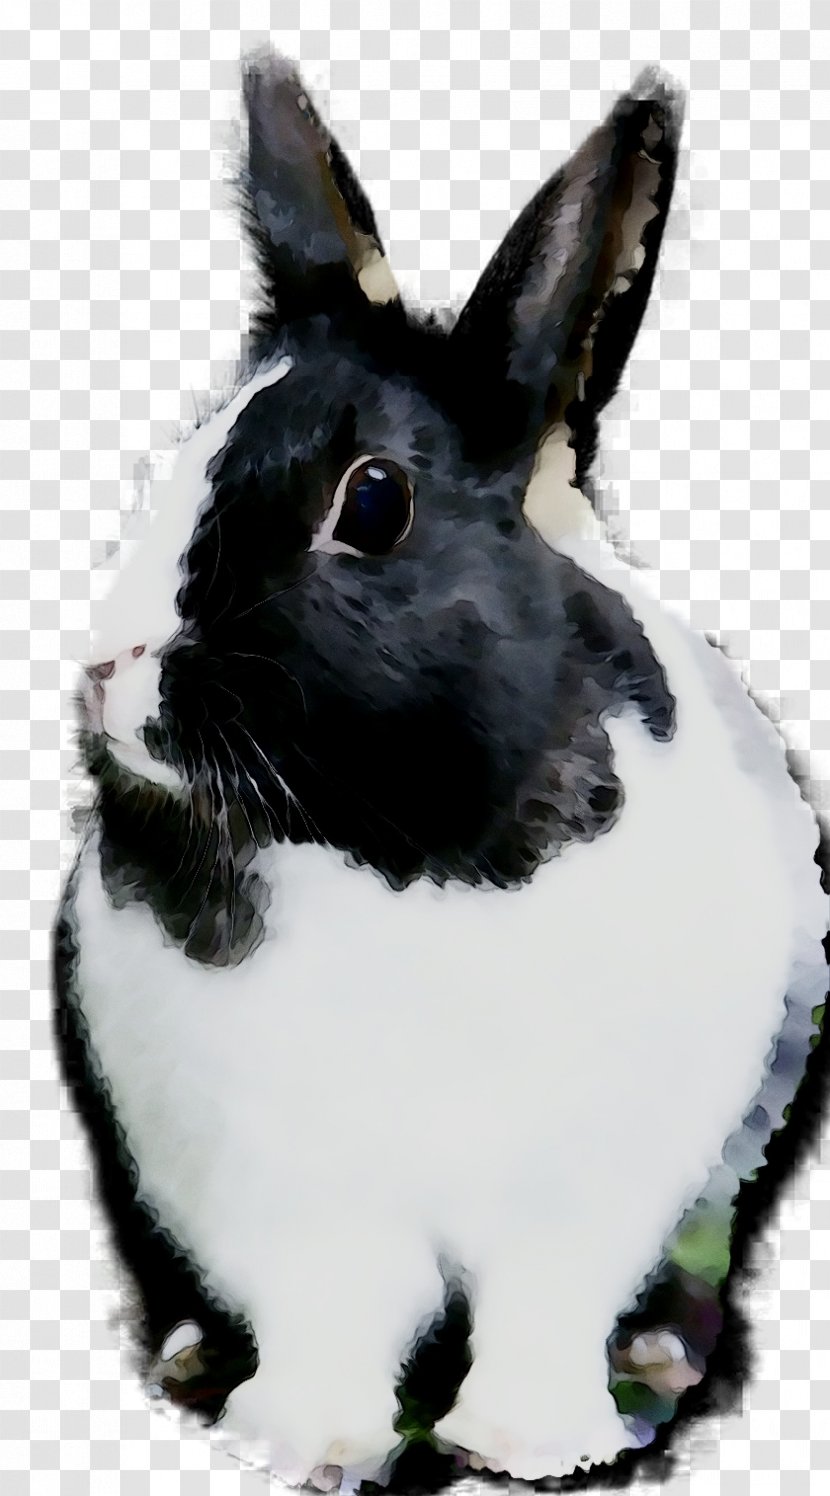 Domestic Rabbit Hare Whiskers Snout - Blackandwhite - Rabbits And Hares Transparent PNG